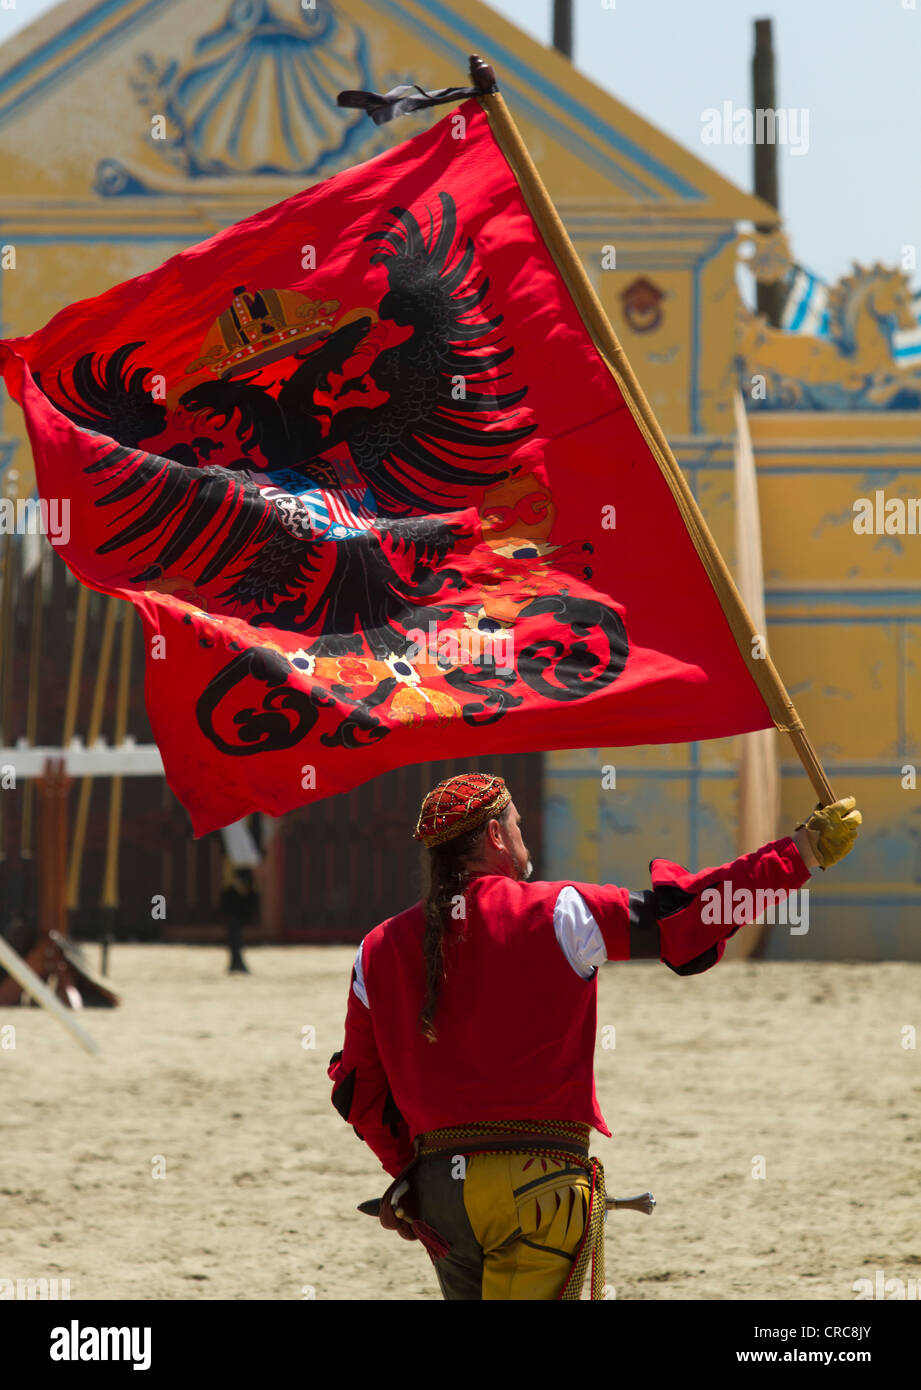 Flag bearer waving a flag from the Renaissance period Stock Photo